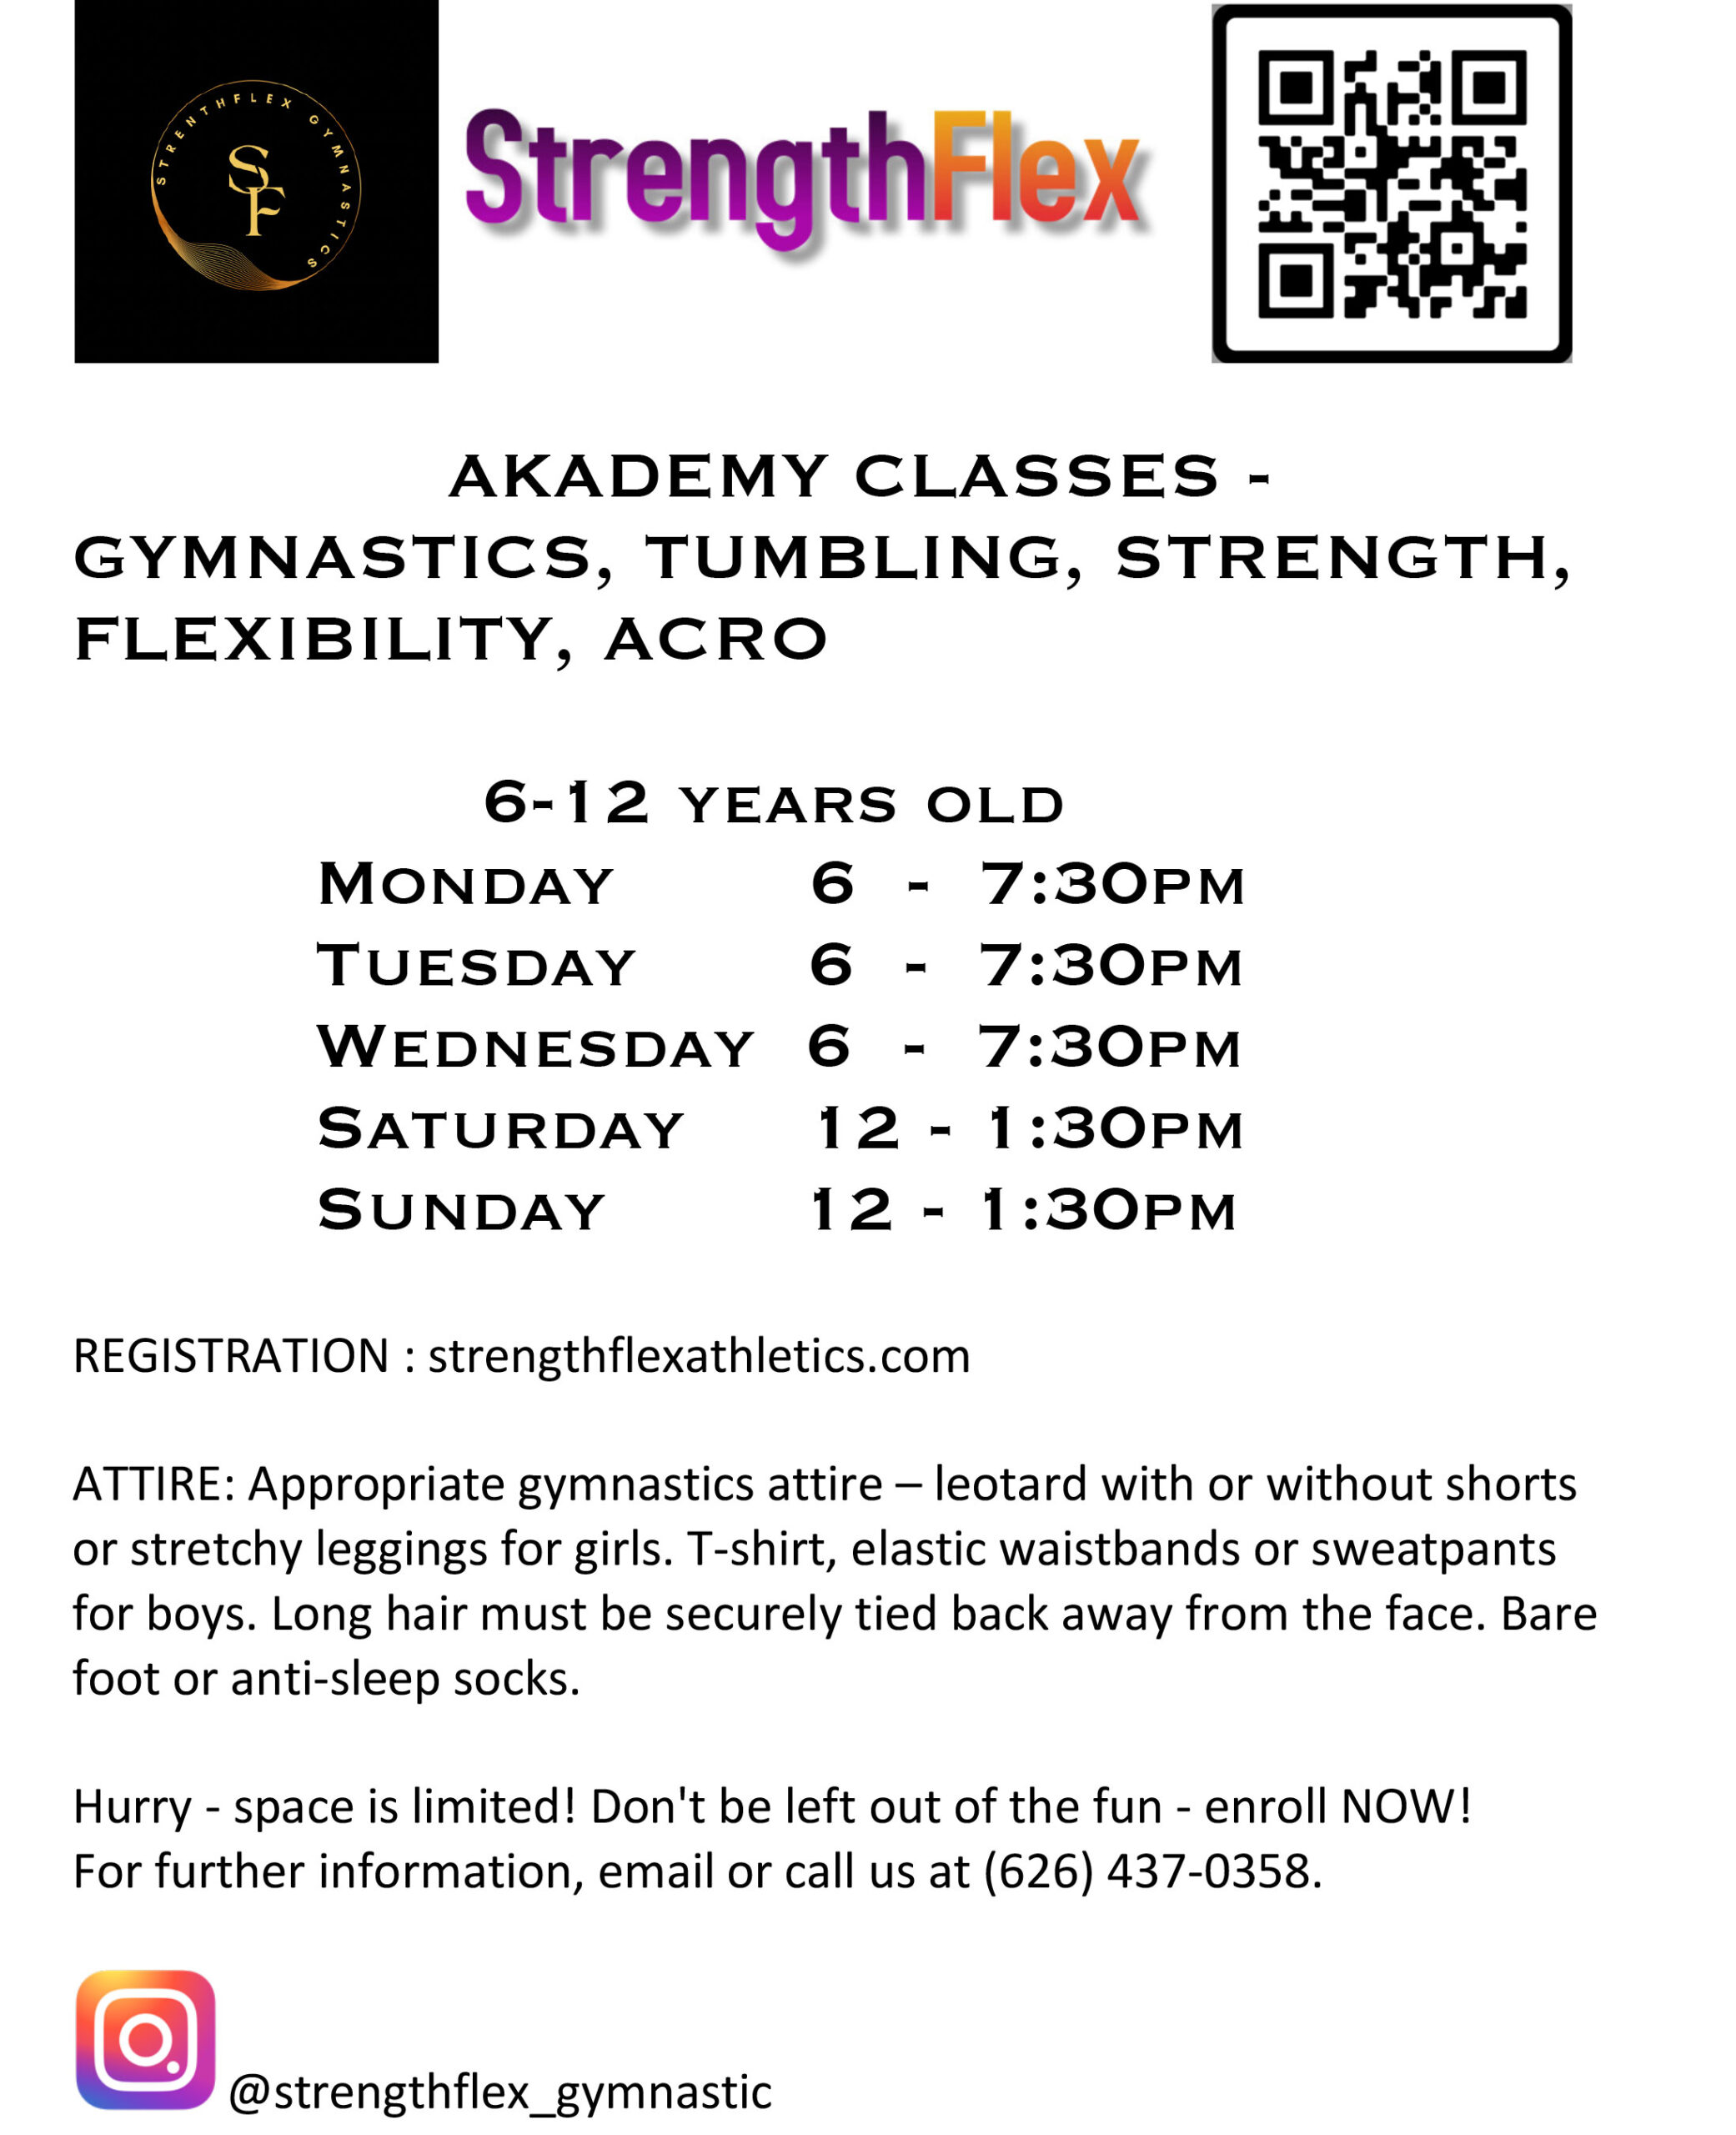 Akademy Classes for Strengthflex Athletics for 6 to 12 year olds 